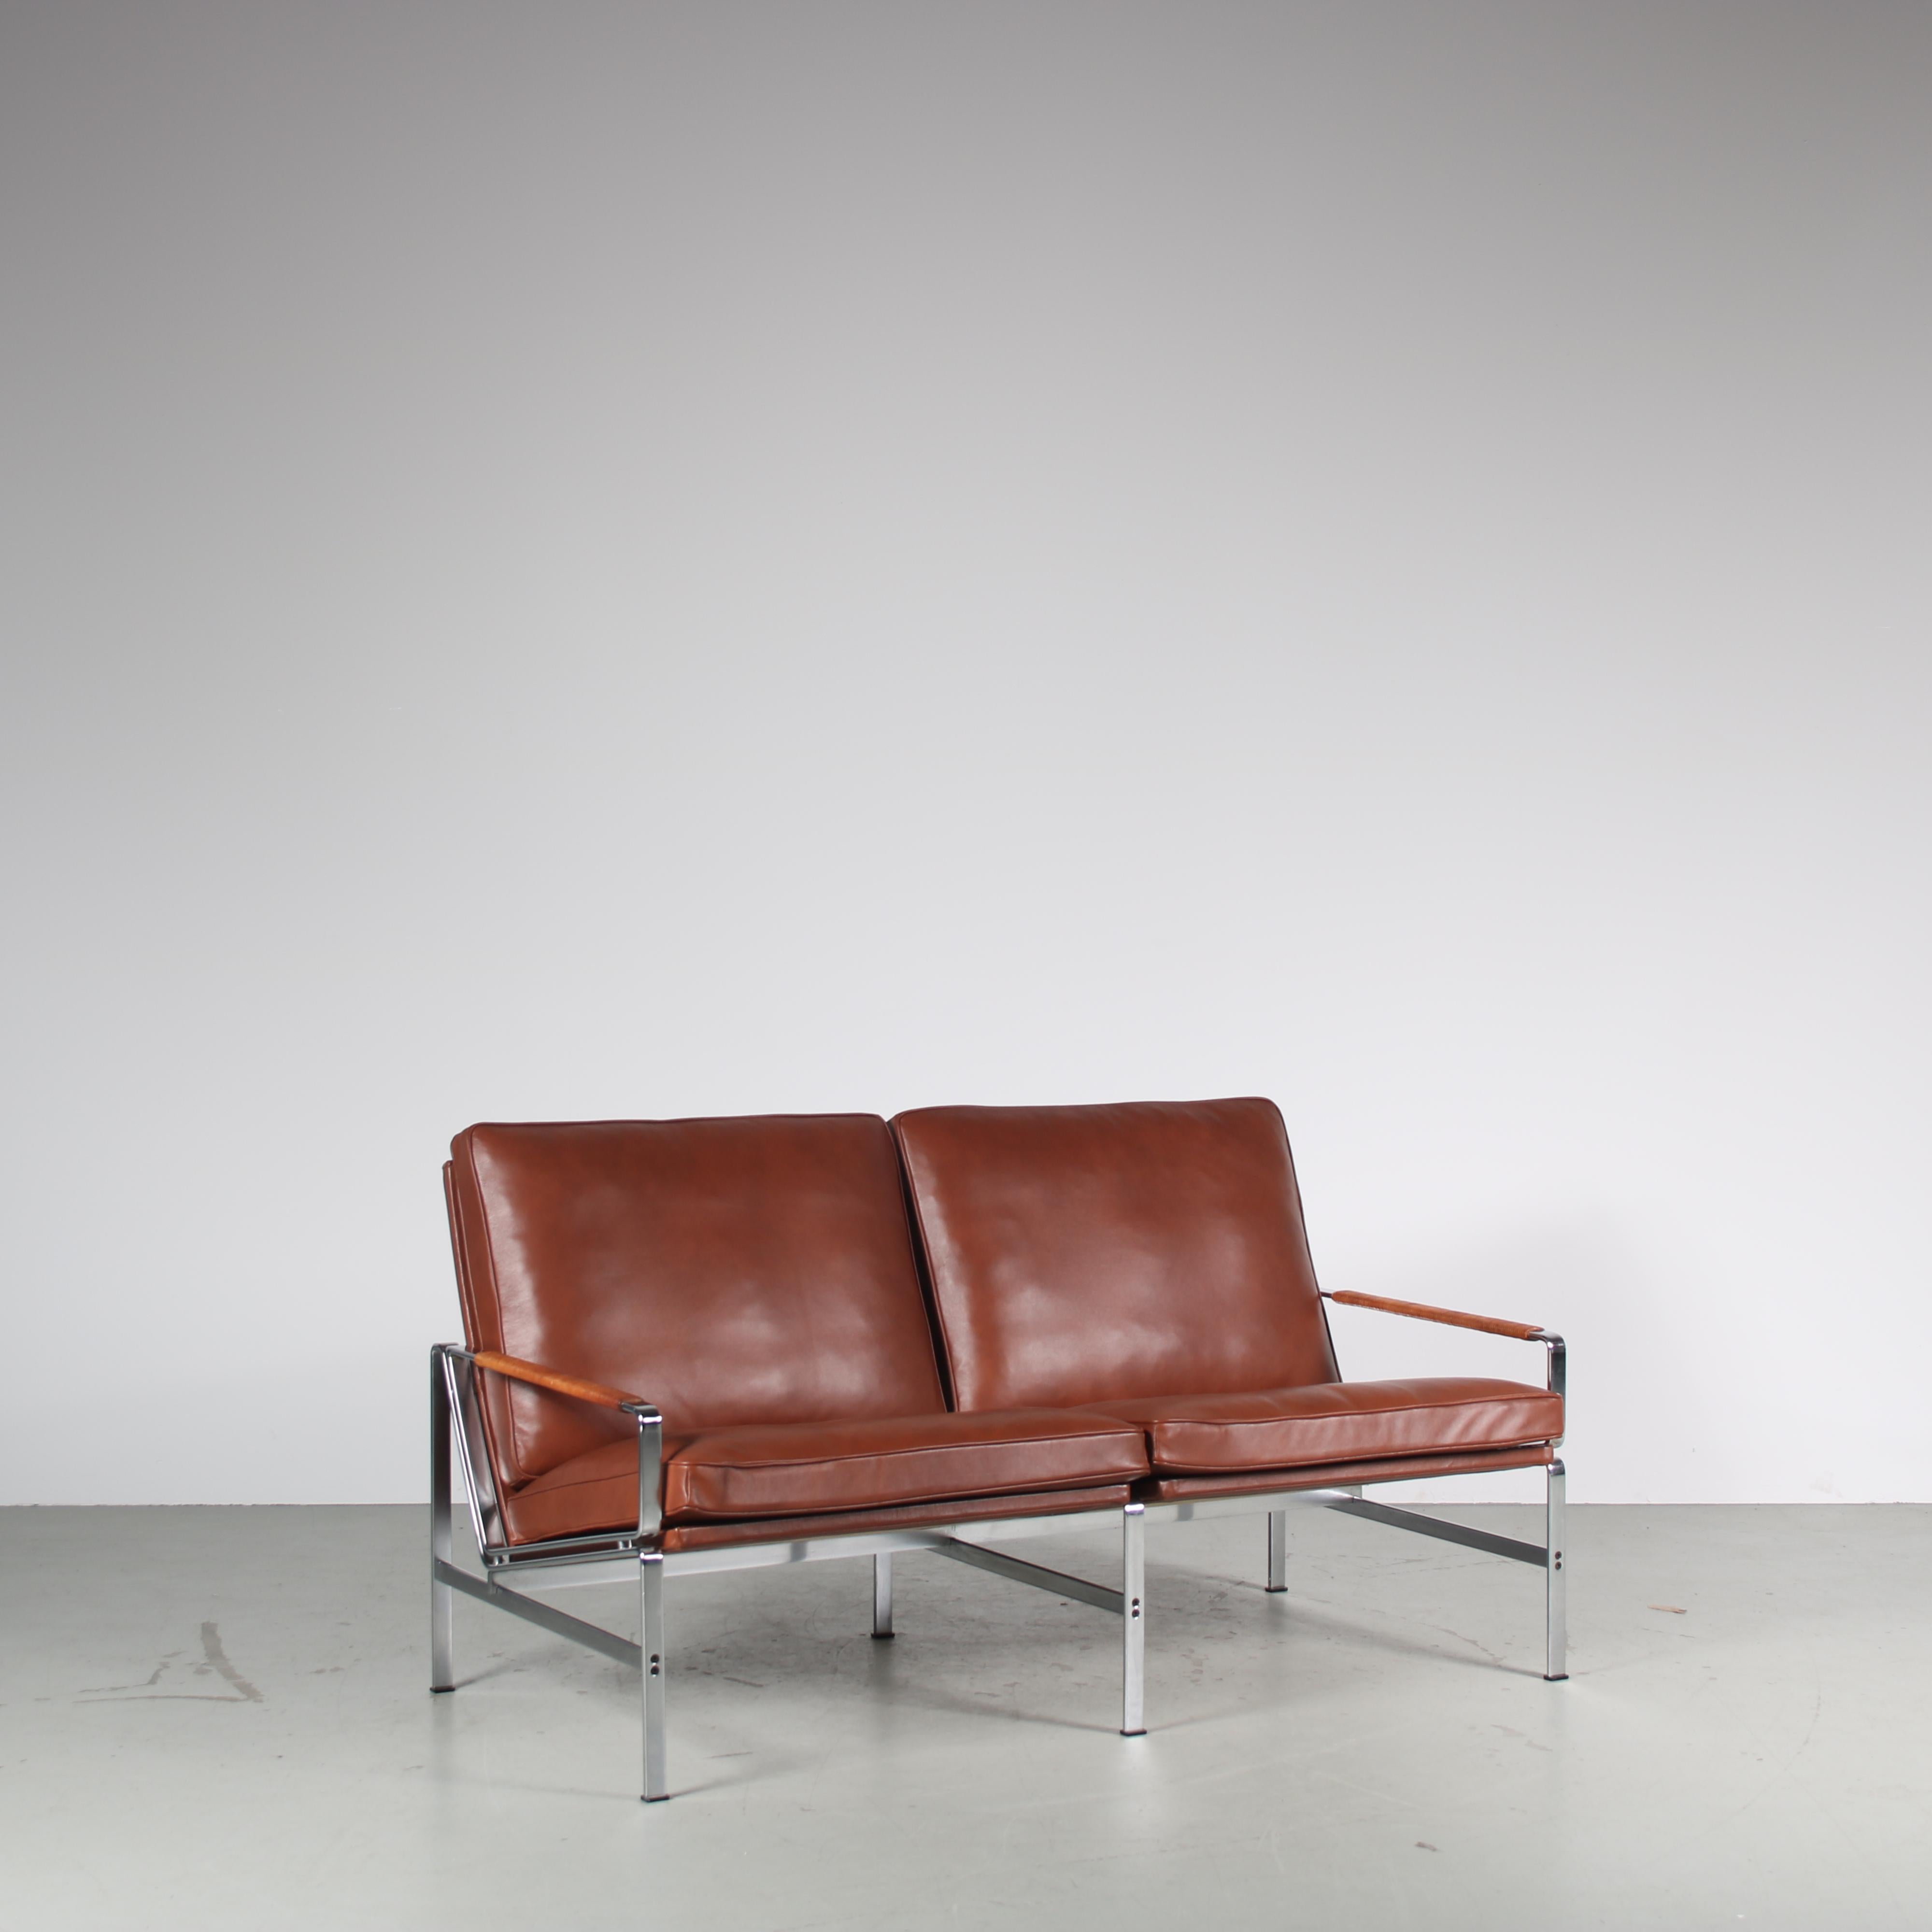 A fantastic 2-seater sofa, model “FK6720”, designed by Preben Fabricius and Jørgen Kastholm, manufactured by Kill International in Germany around 1960.

Thhis stunning piece is newly upholstered in the best quality brown leather with a wrapped